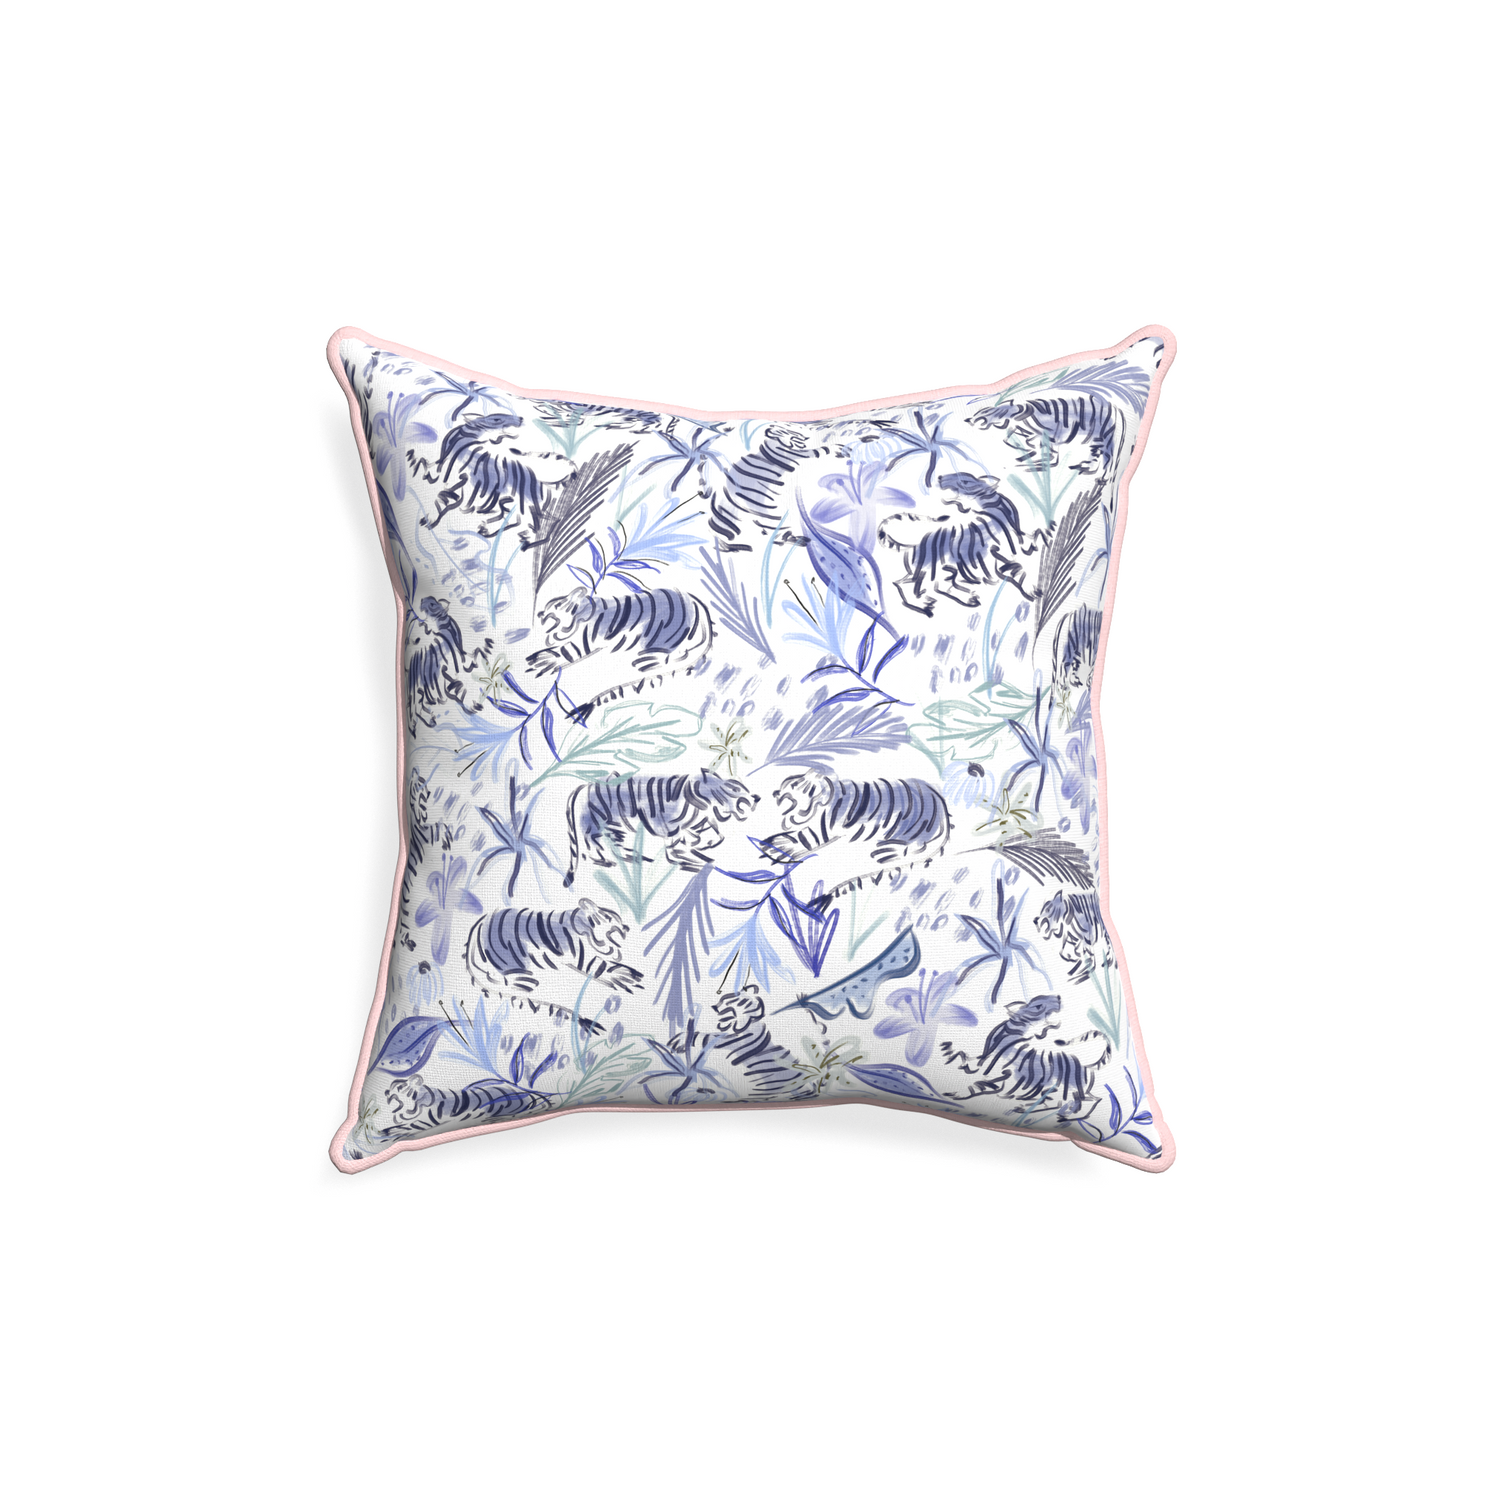 18-square frida blue custom blue with intricate tiger designpillow with petal piping on white background